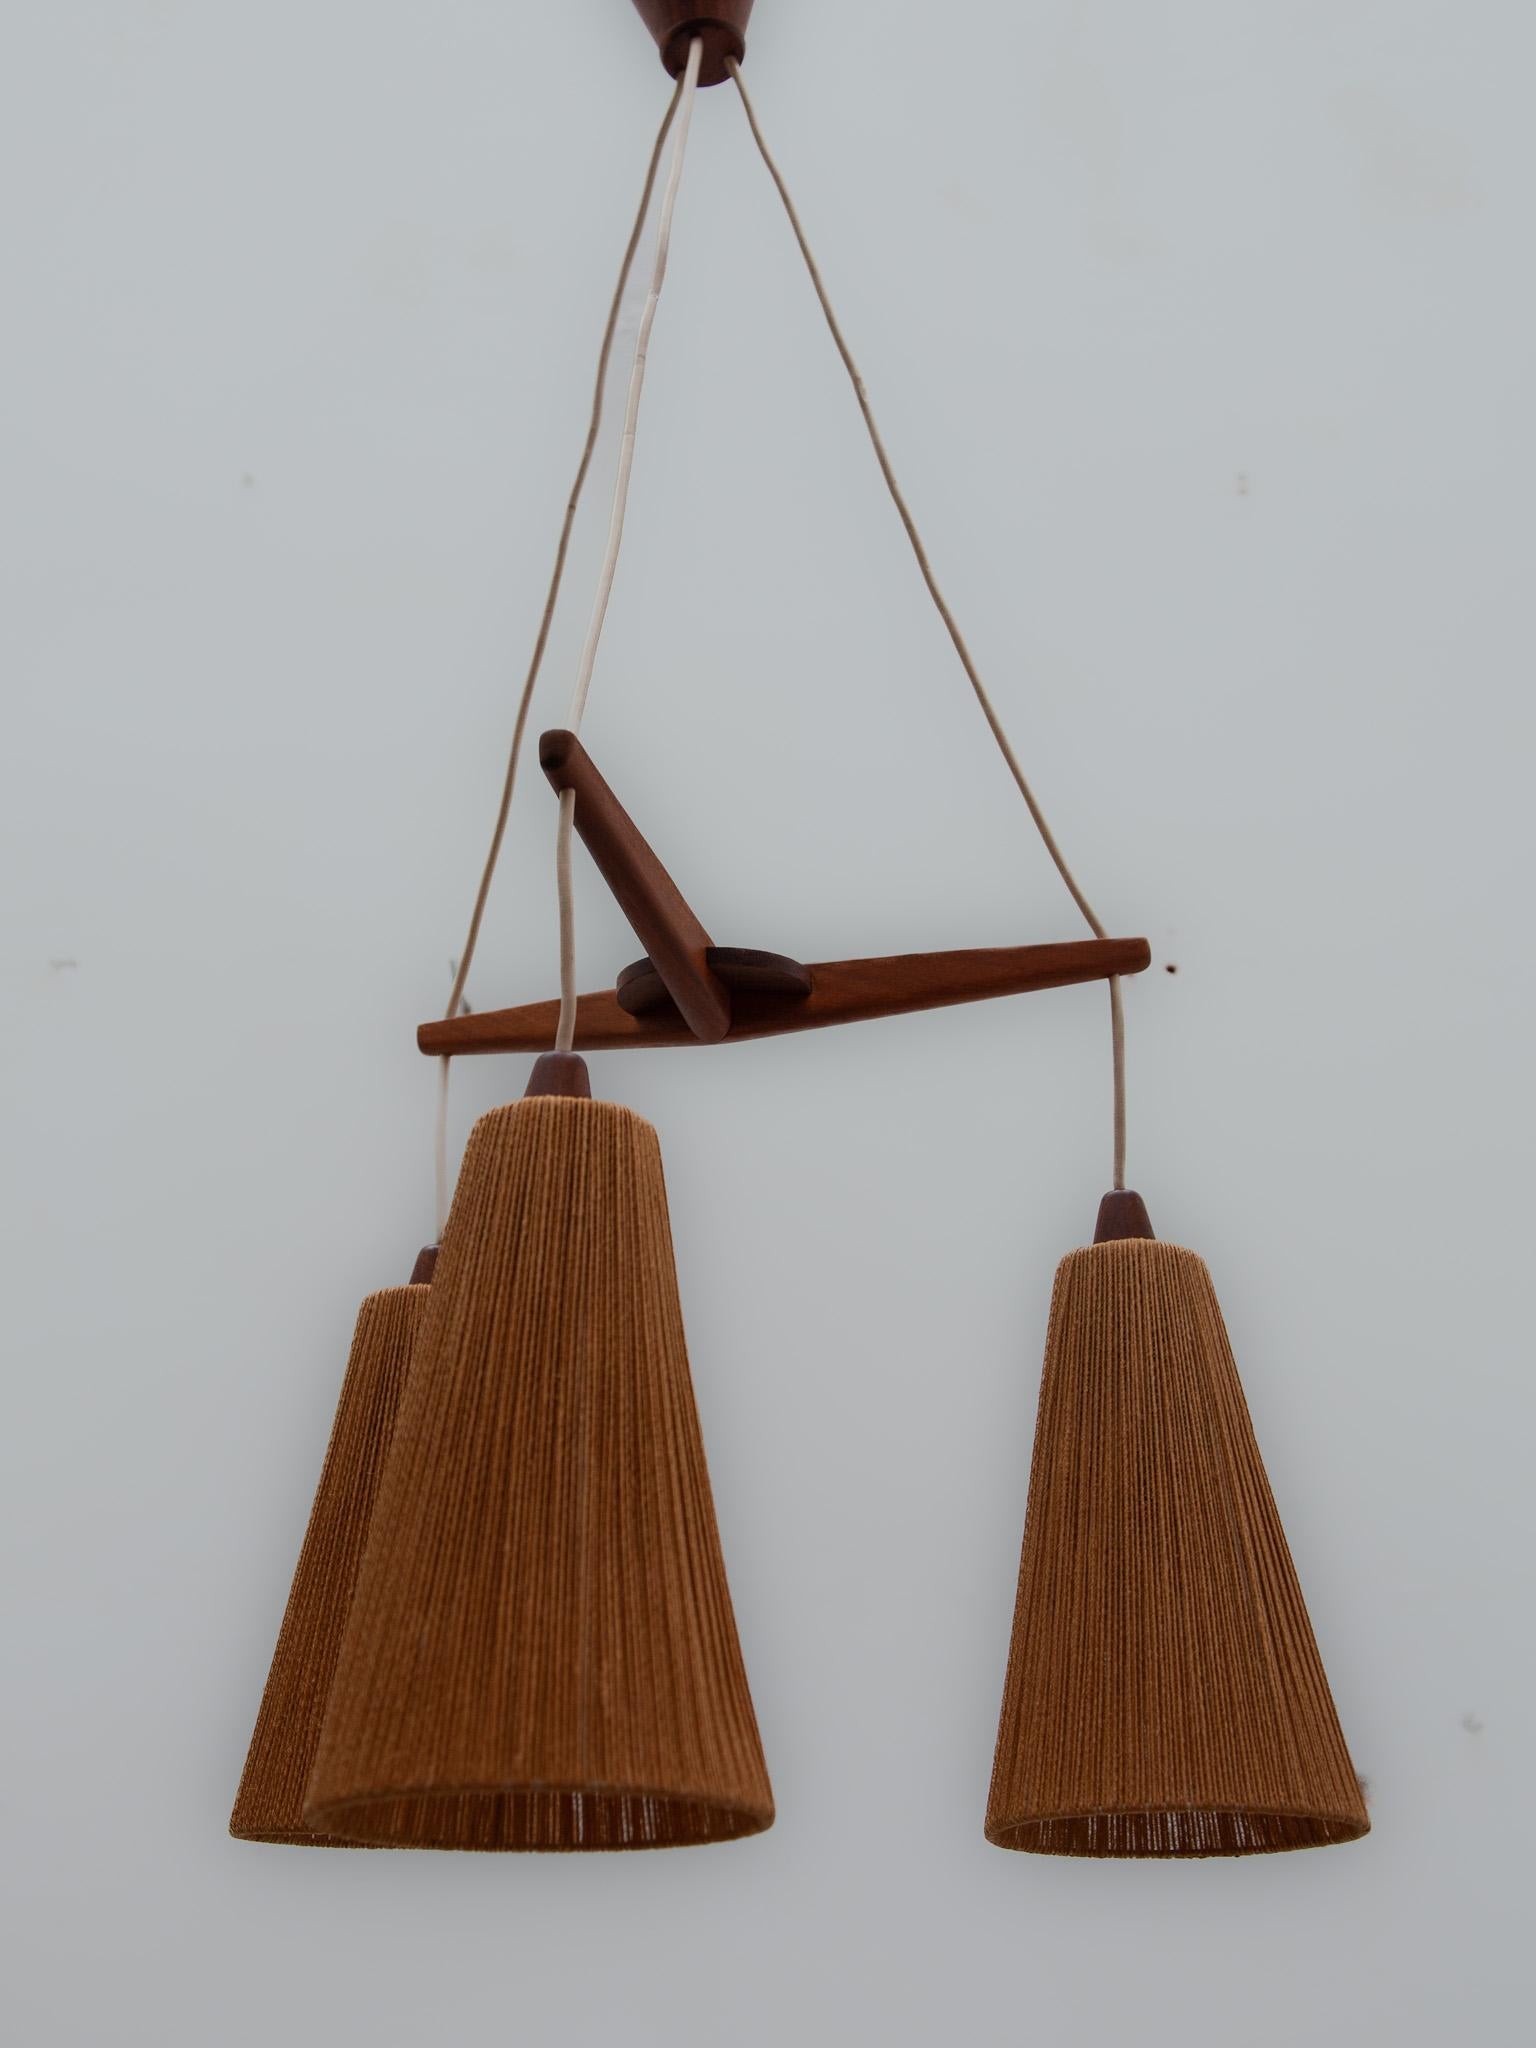 Mid-20th Century Teak and Jute Cord Pendant Cascade Lamp by Temde, Germany, 1960s For Sale